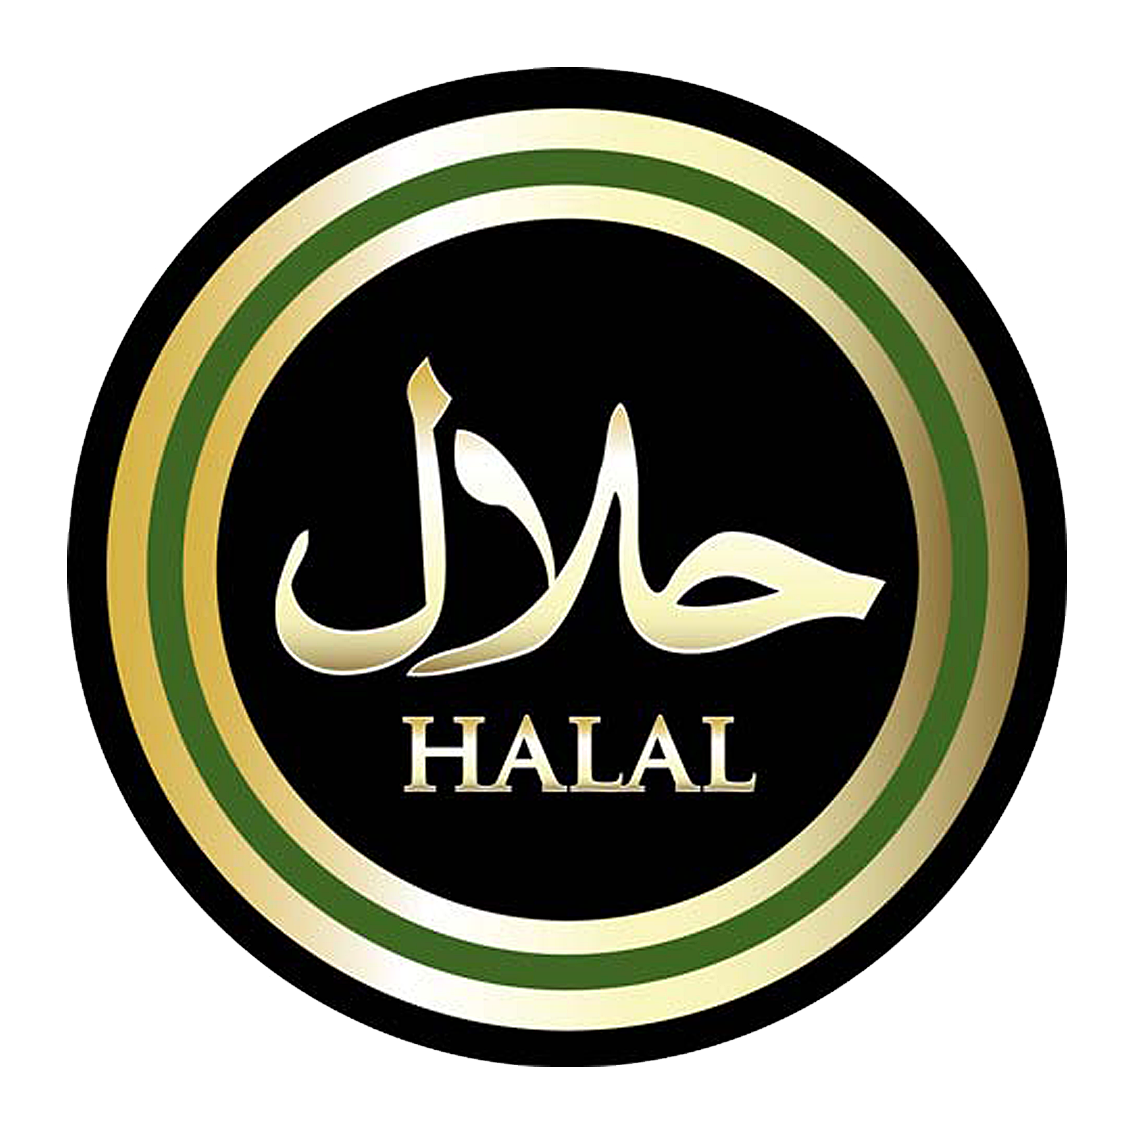 Download Offering Initial Cryptocurrency Platform Bihalal ...